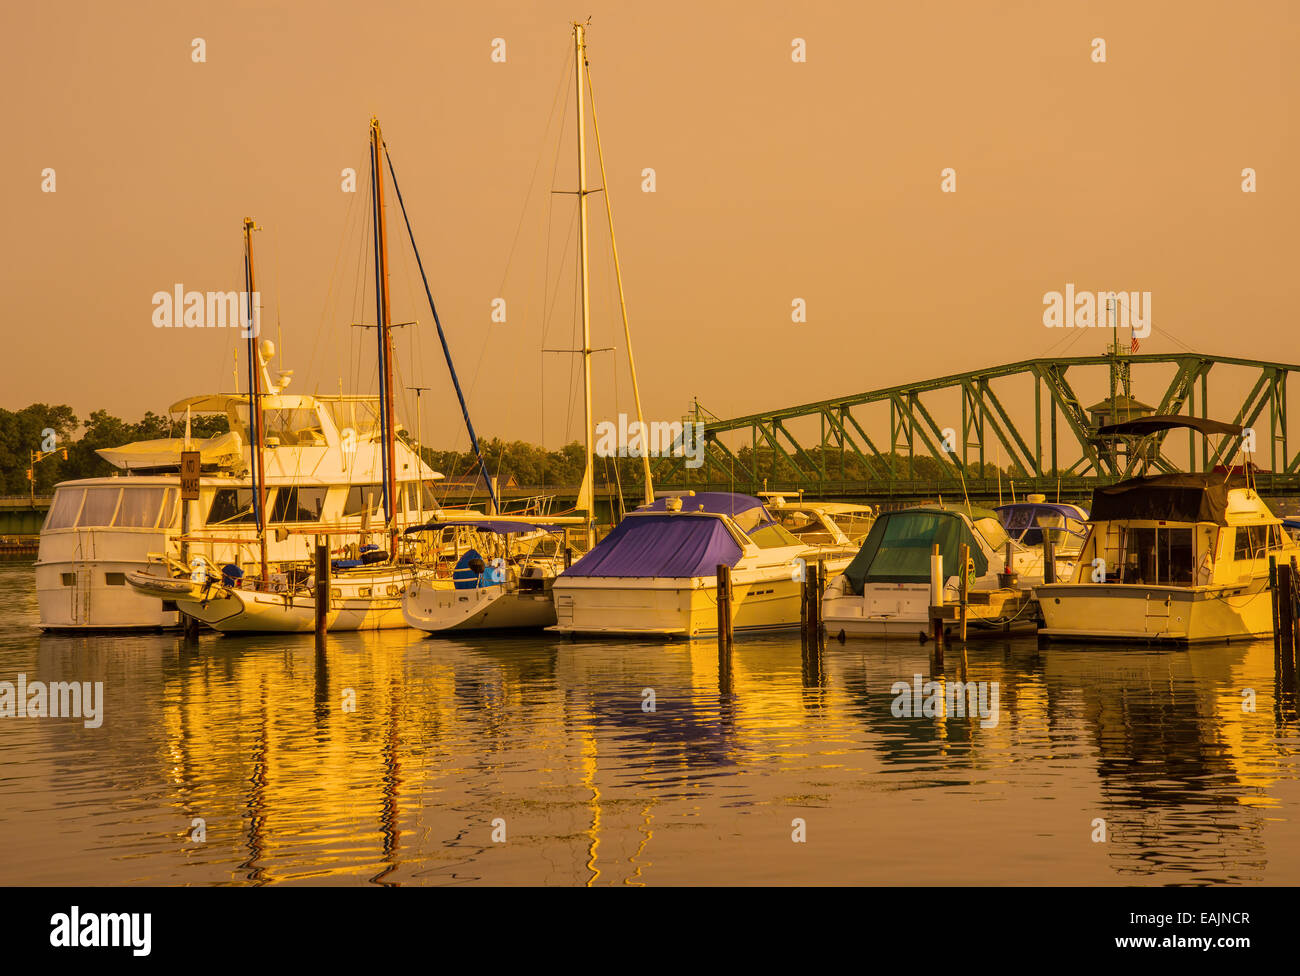 Golden glow on marina boats and water Stock Photo